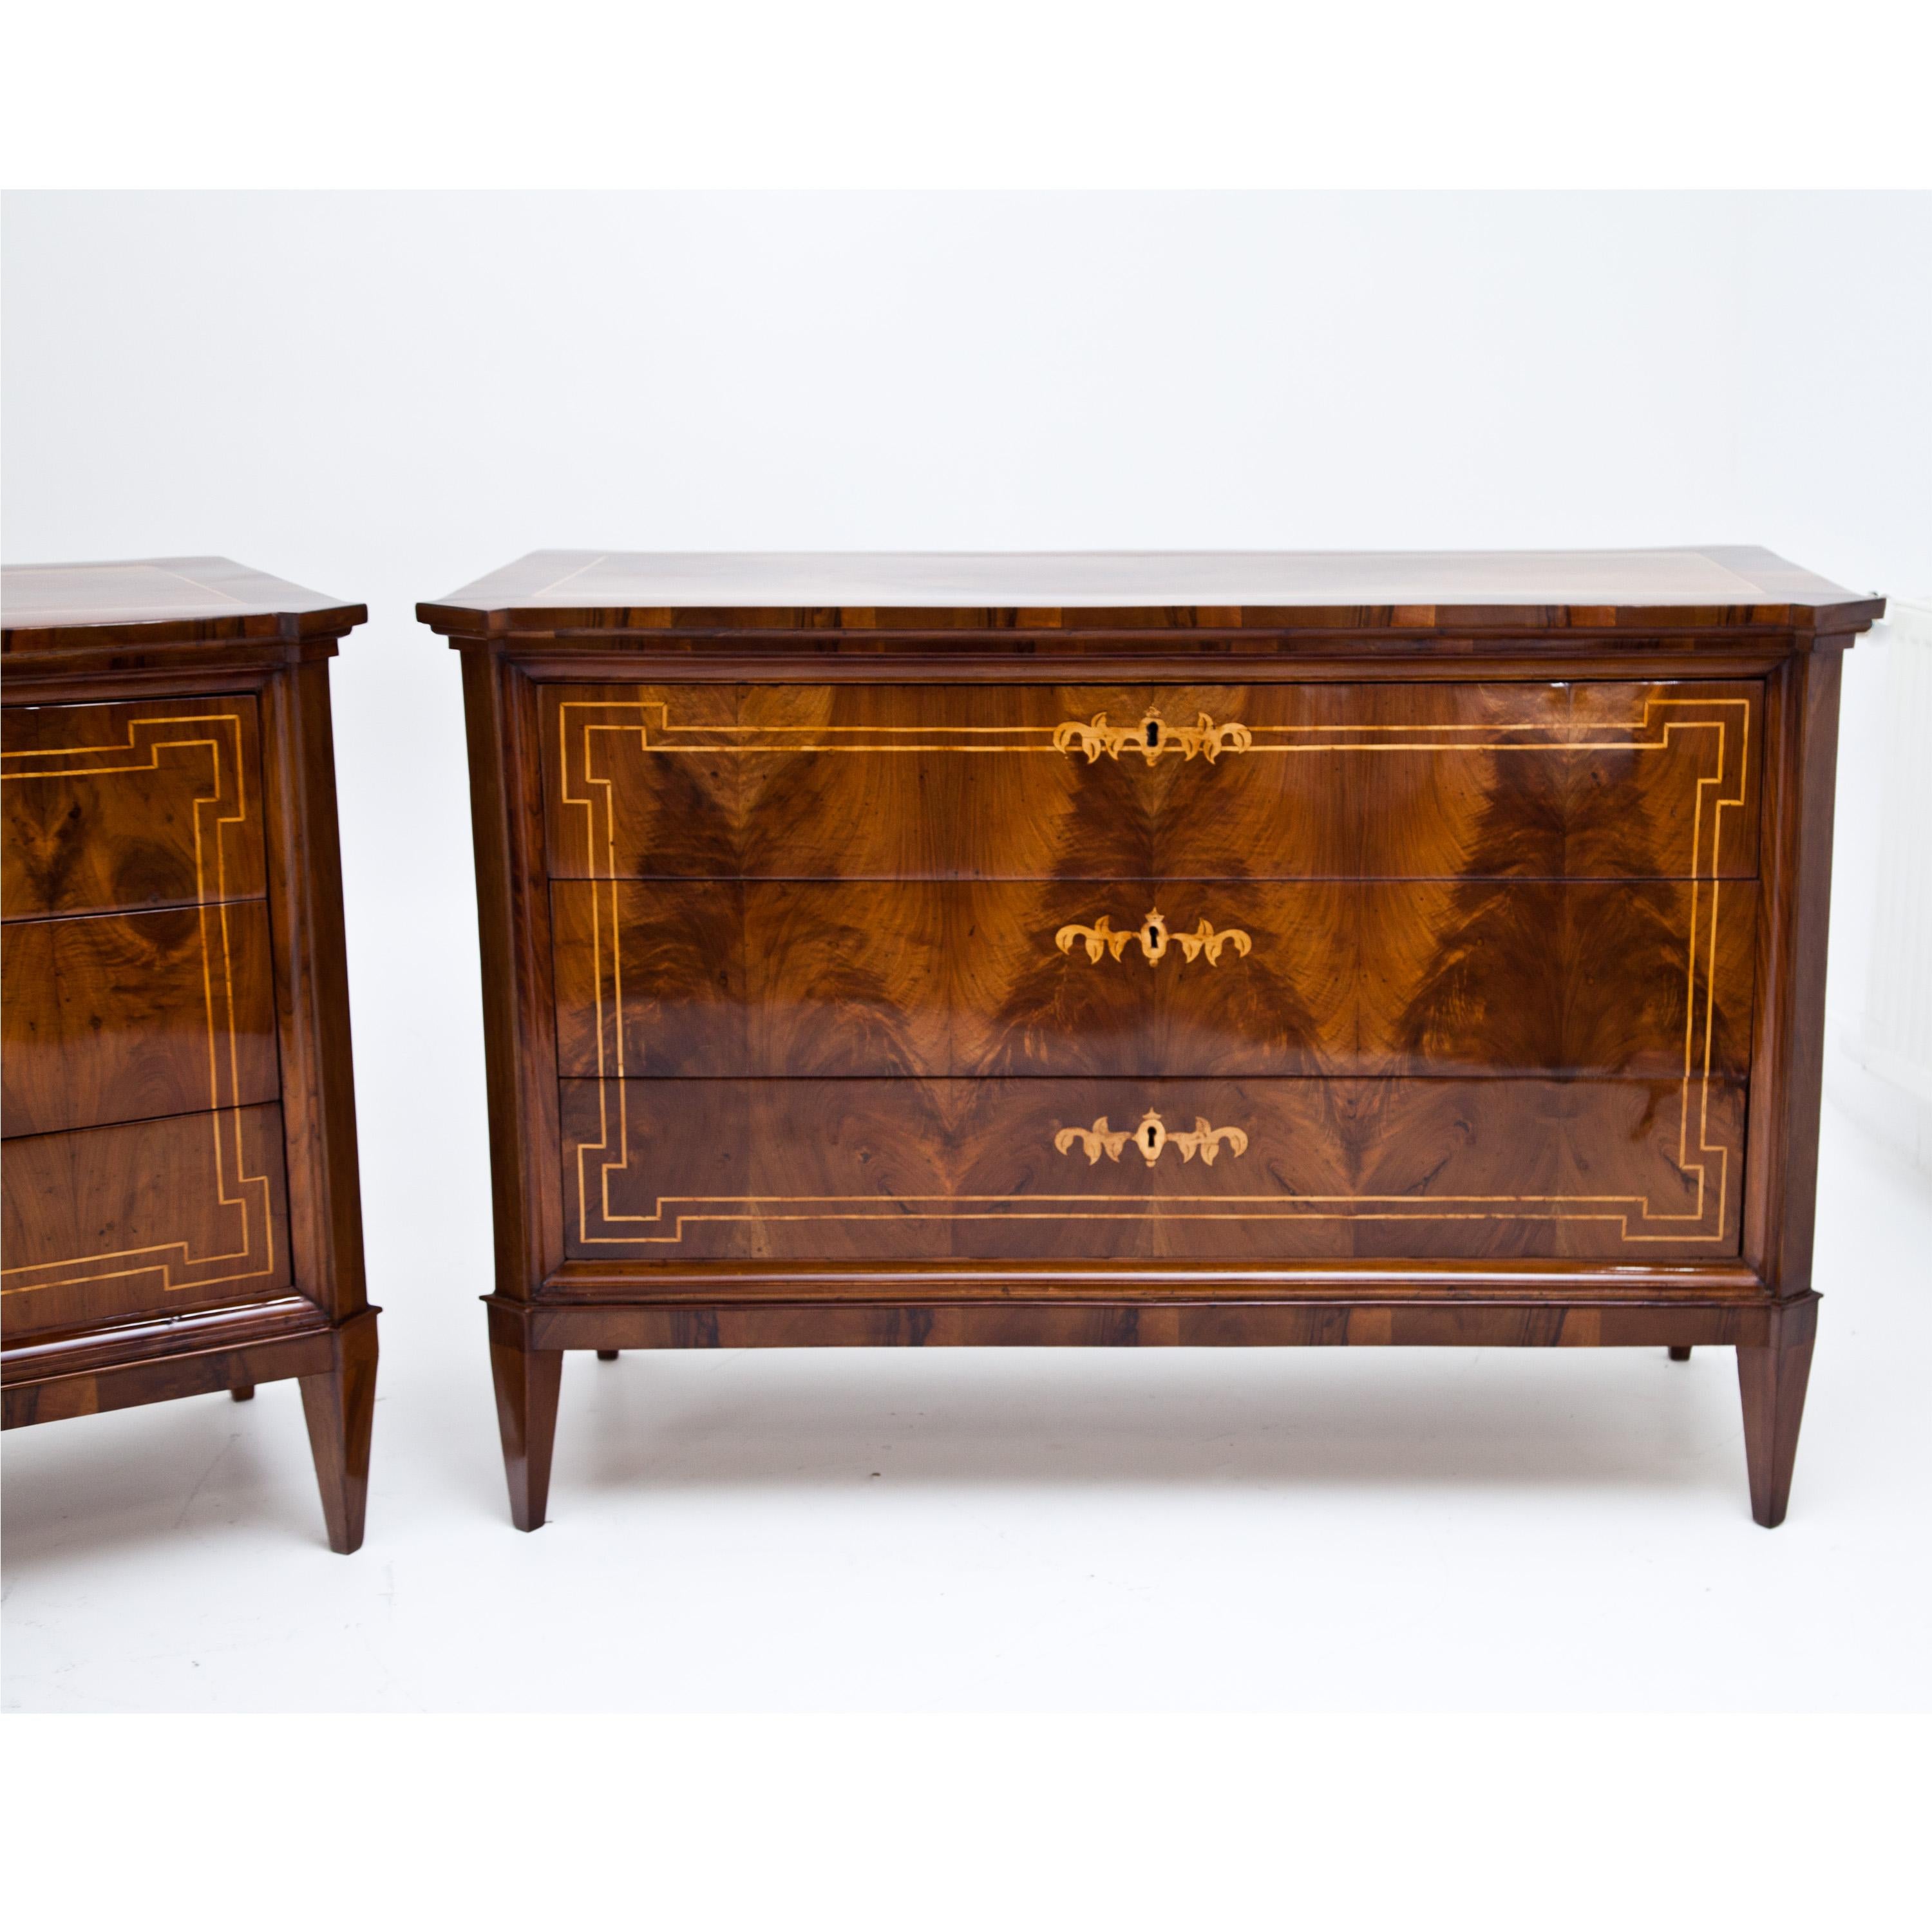 Pair of Biedermeier chests of drawers with three drawers on square pointed feet. The body with bevelled corners and profiled strips. The drawers and top shelf are framed with thread inlays. The keyholes are decorated with additional inlays in the